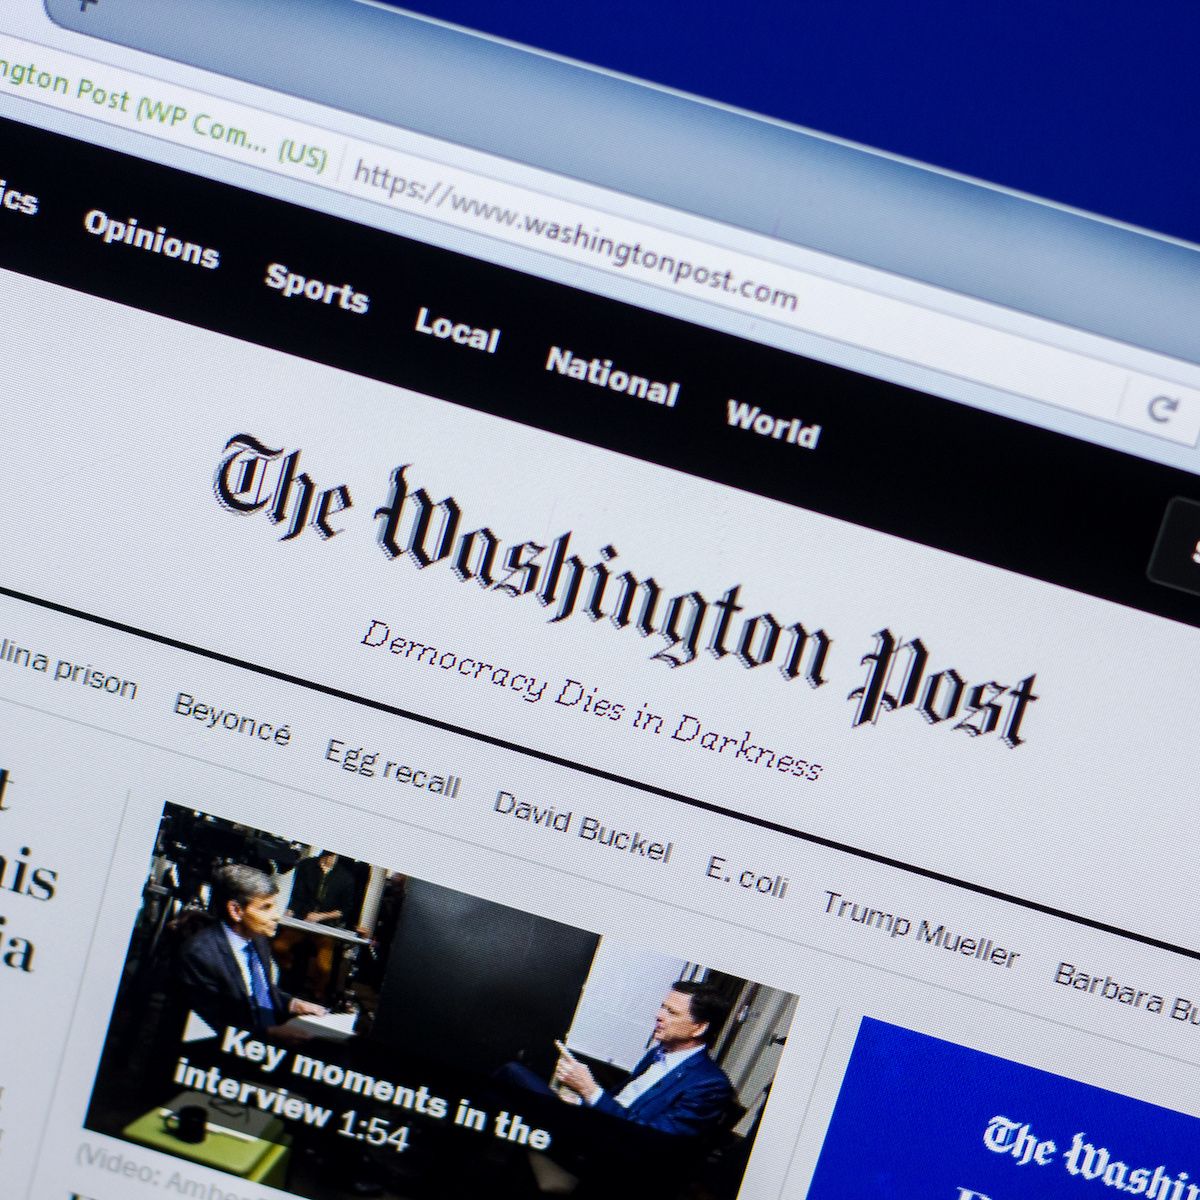 The homepage for The Washington Post displayed online. News articles are often locked behind paywalls.